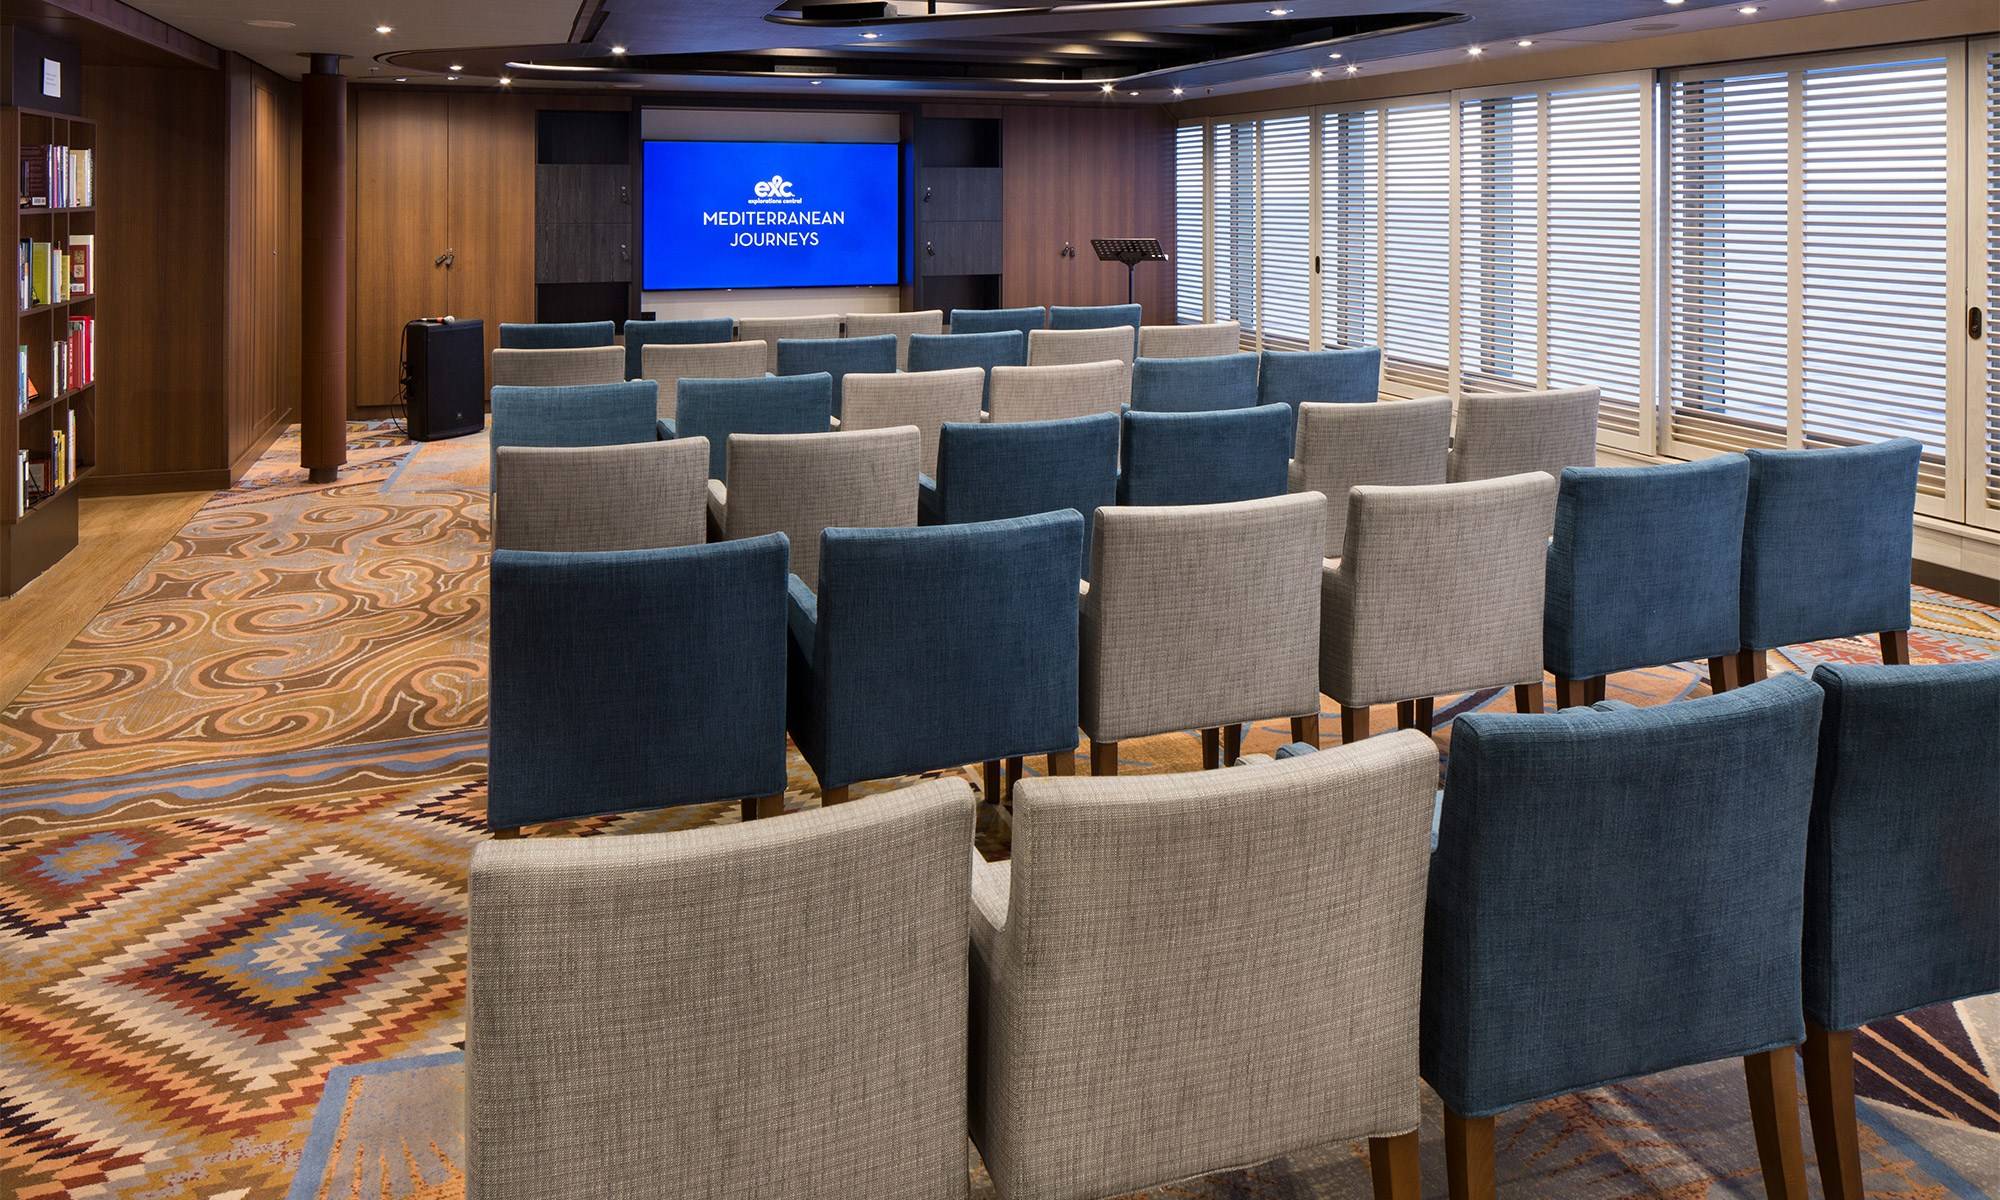 Westerdam Lecture Room